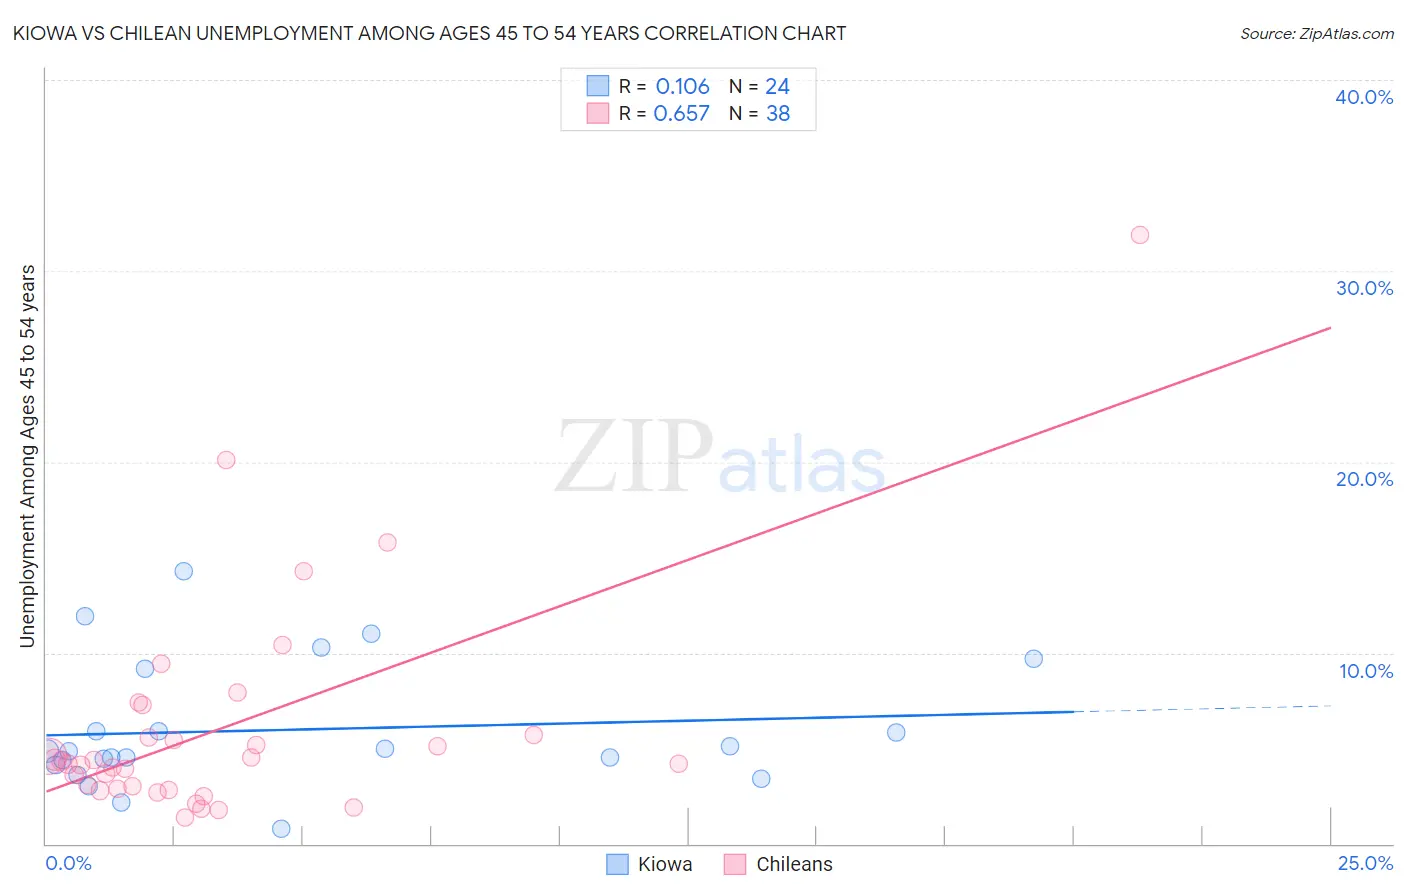 Kiowa vs Chilean Unemployment Among Ages 45 to 54 years